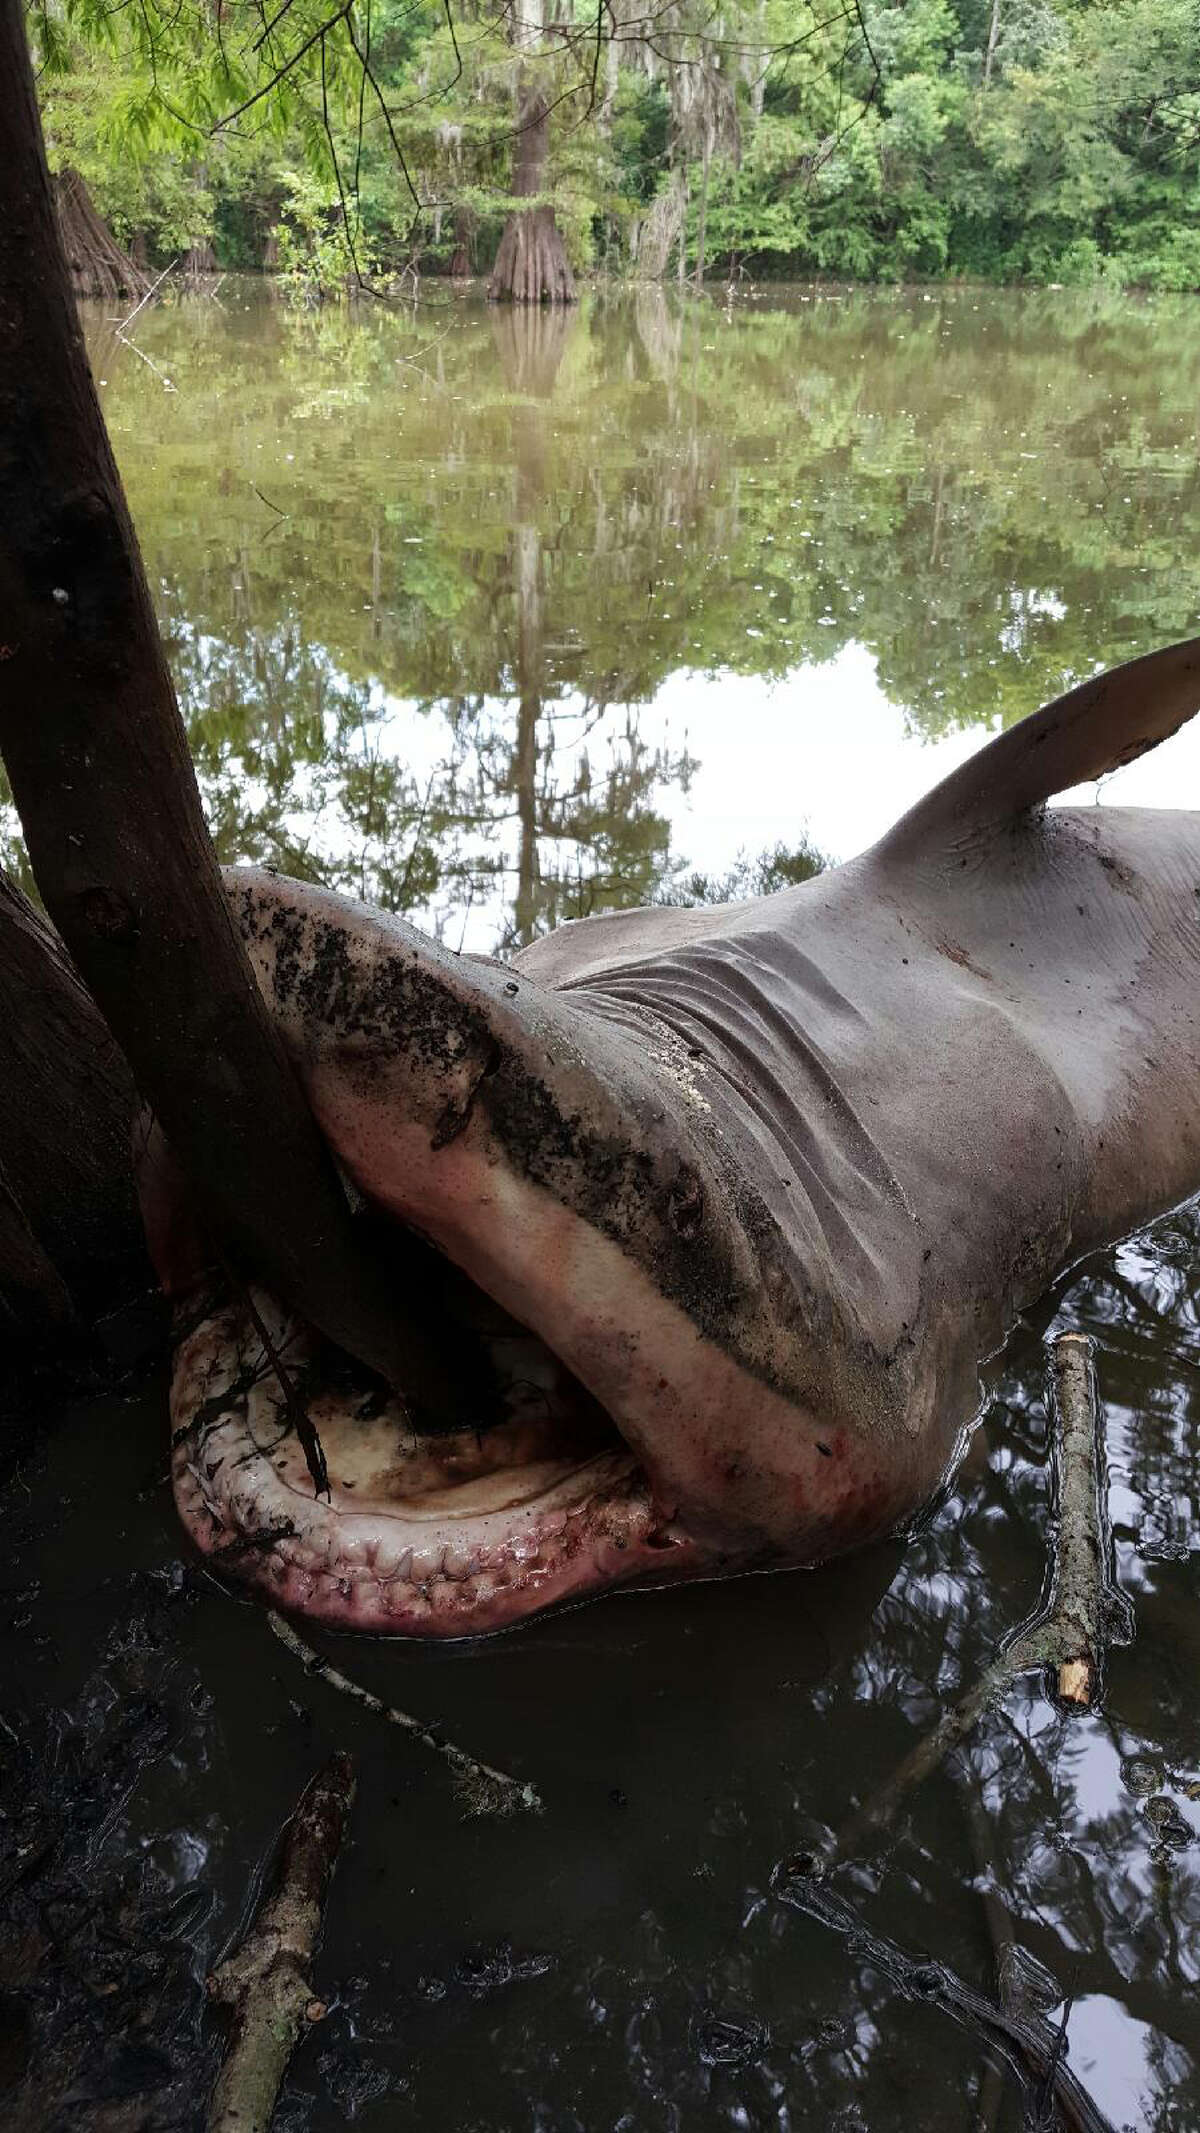 The decomposing remains of a bull shark reportedly were found in a lake near Kenefick in Liberty County Tuesday. Bull sharks are known for swimming many miles into freshwater rivers and streams but authorities aren't certain at this time if this shark was dumped in the lake or became stranded.